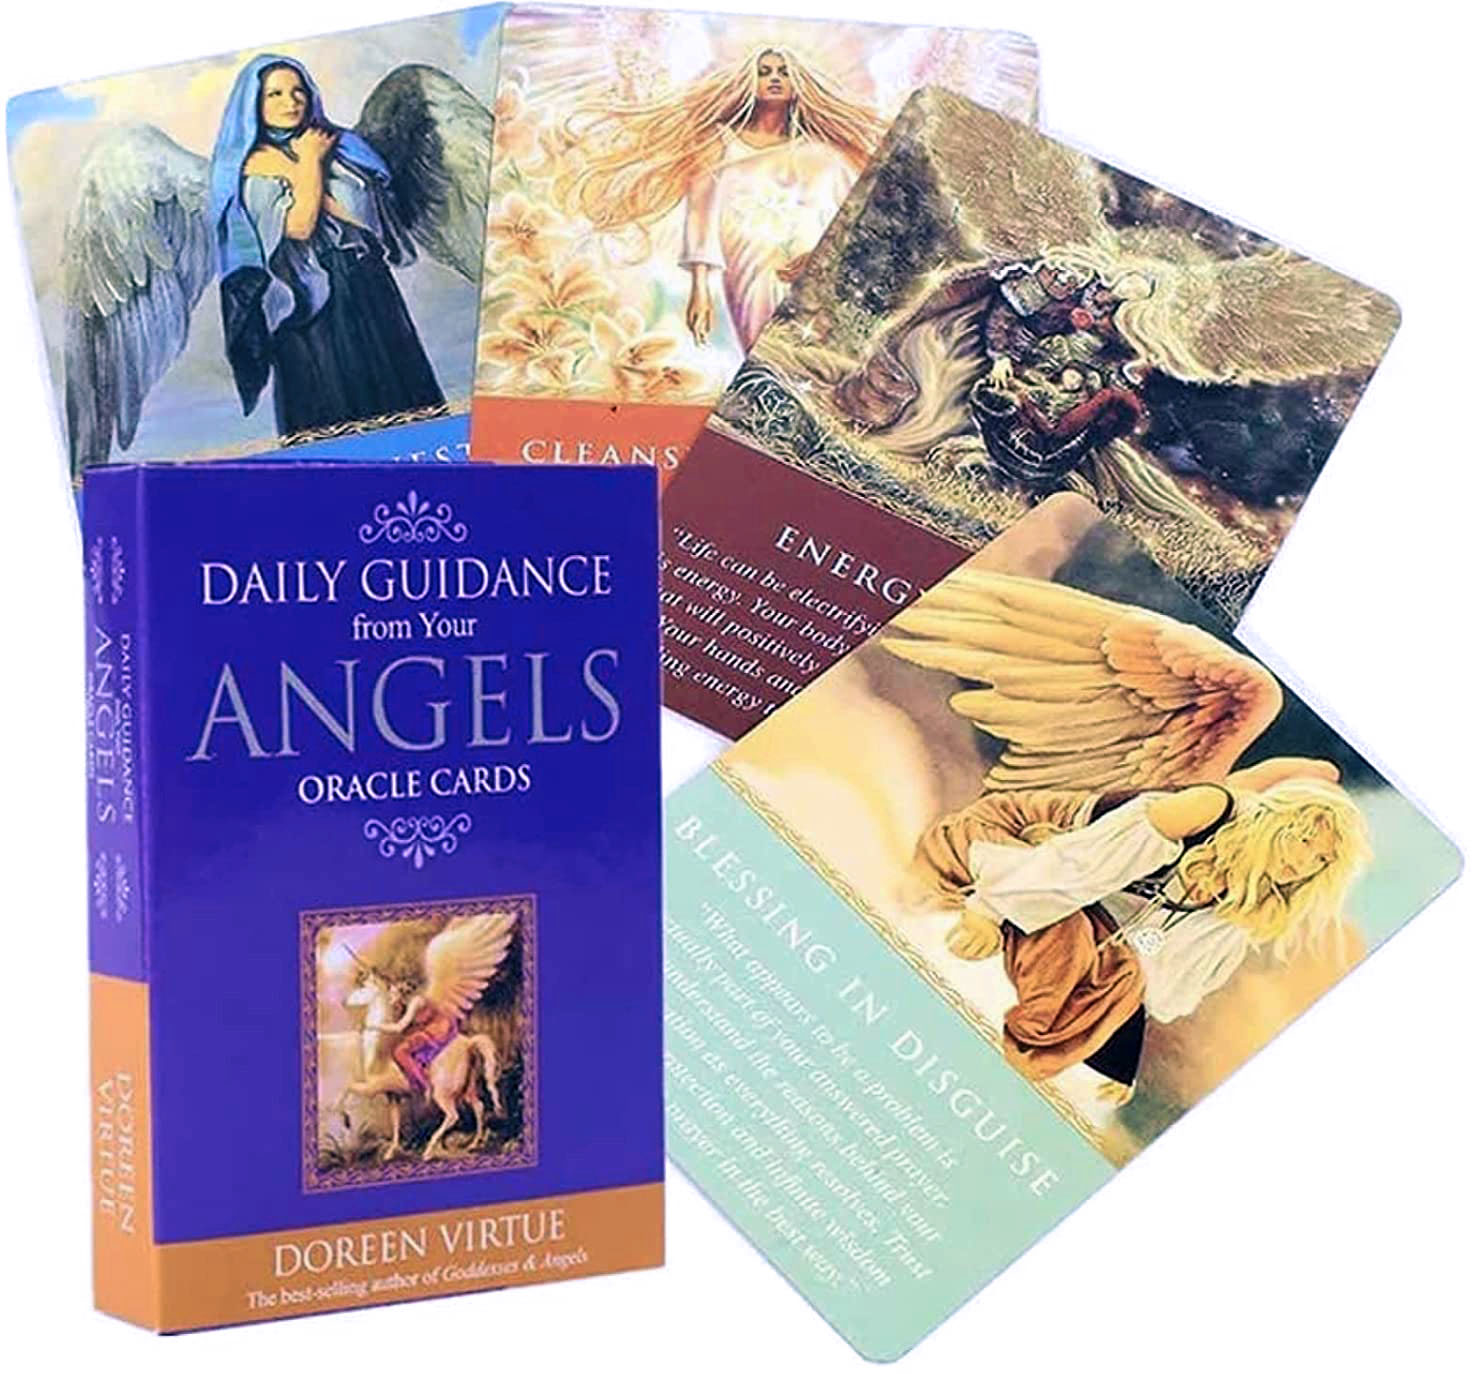 Daily Guidance from Your Angels Oracle Cards by Doreen Virtue